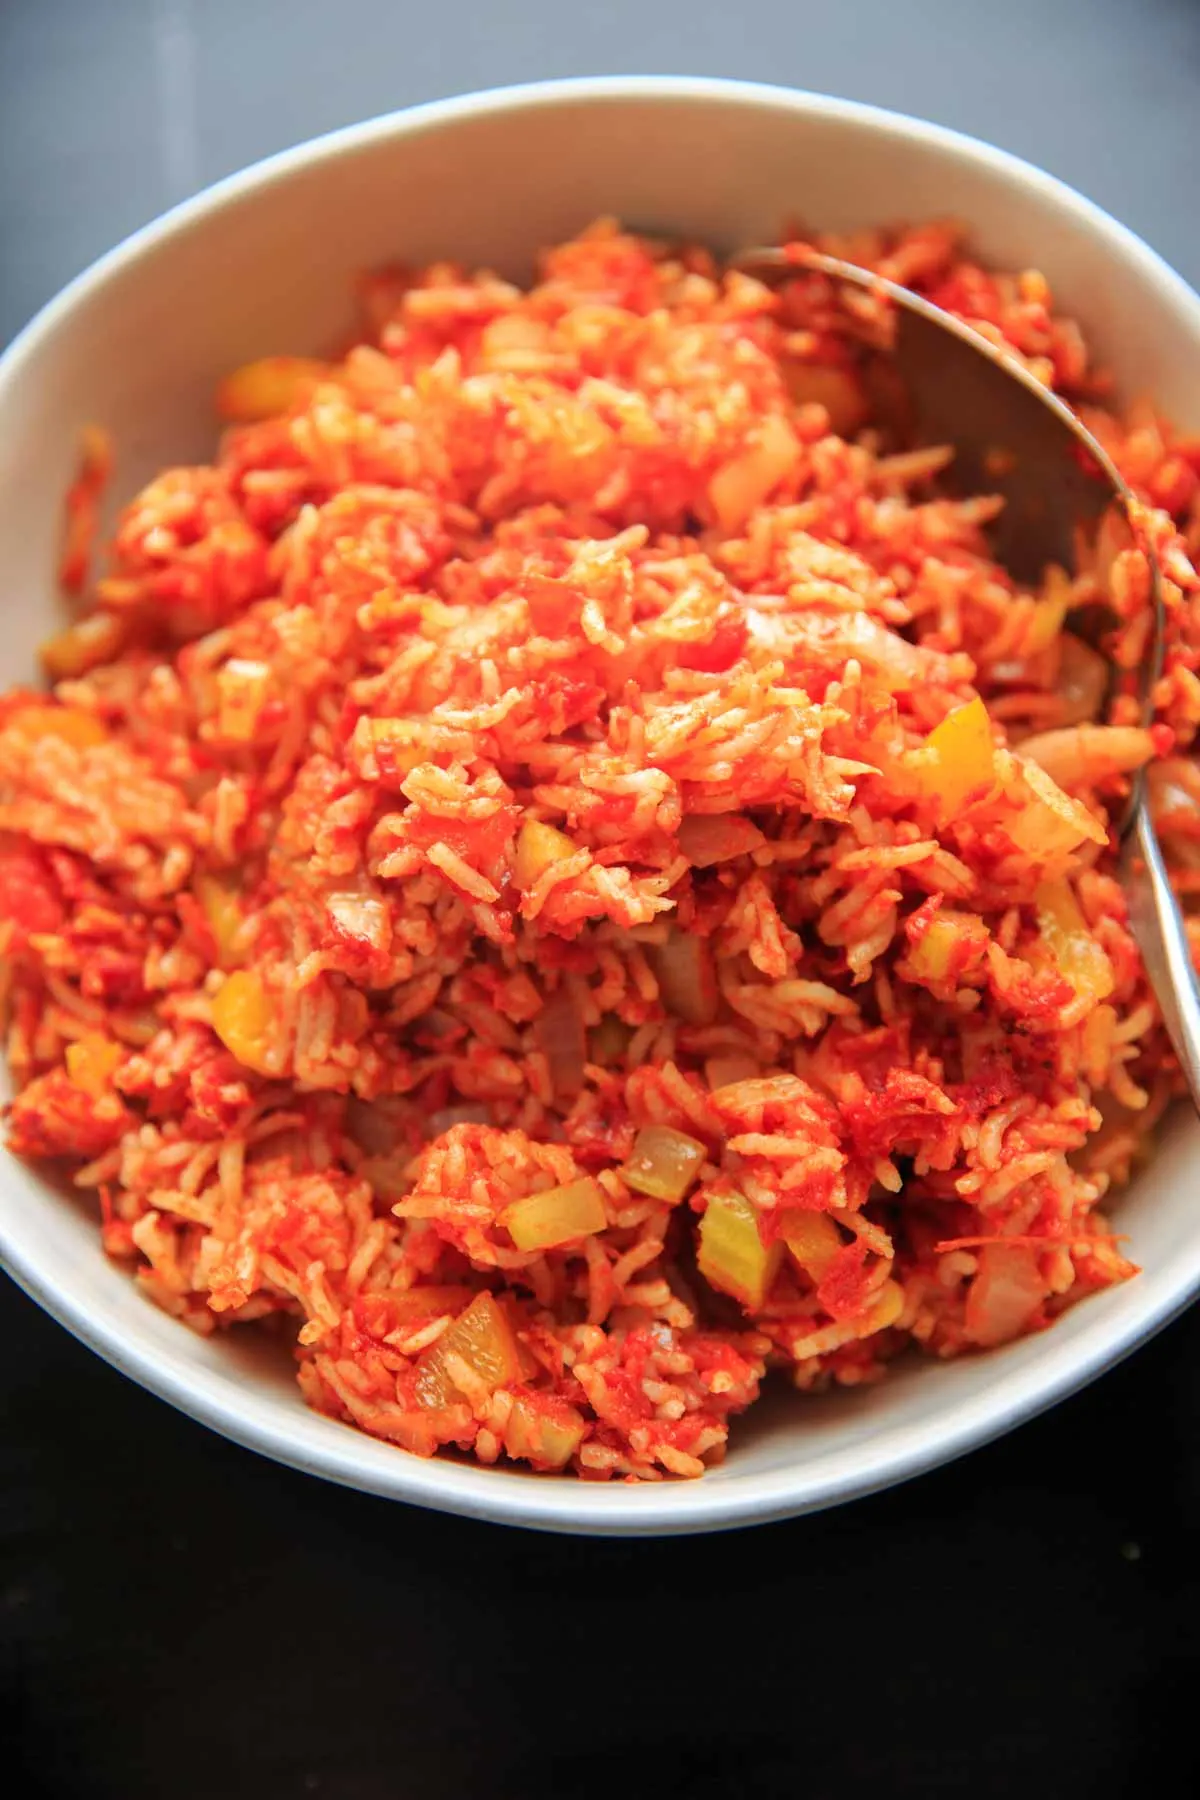 https://www.trialandeater.com/wp-content/uploads/2018/04/Spanish-Rice-Recipe-Trial-and-Eater-6.jpg.webp